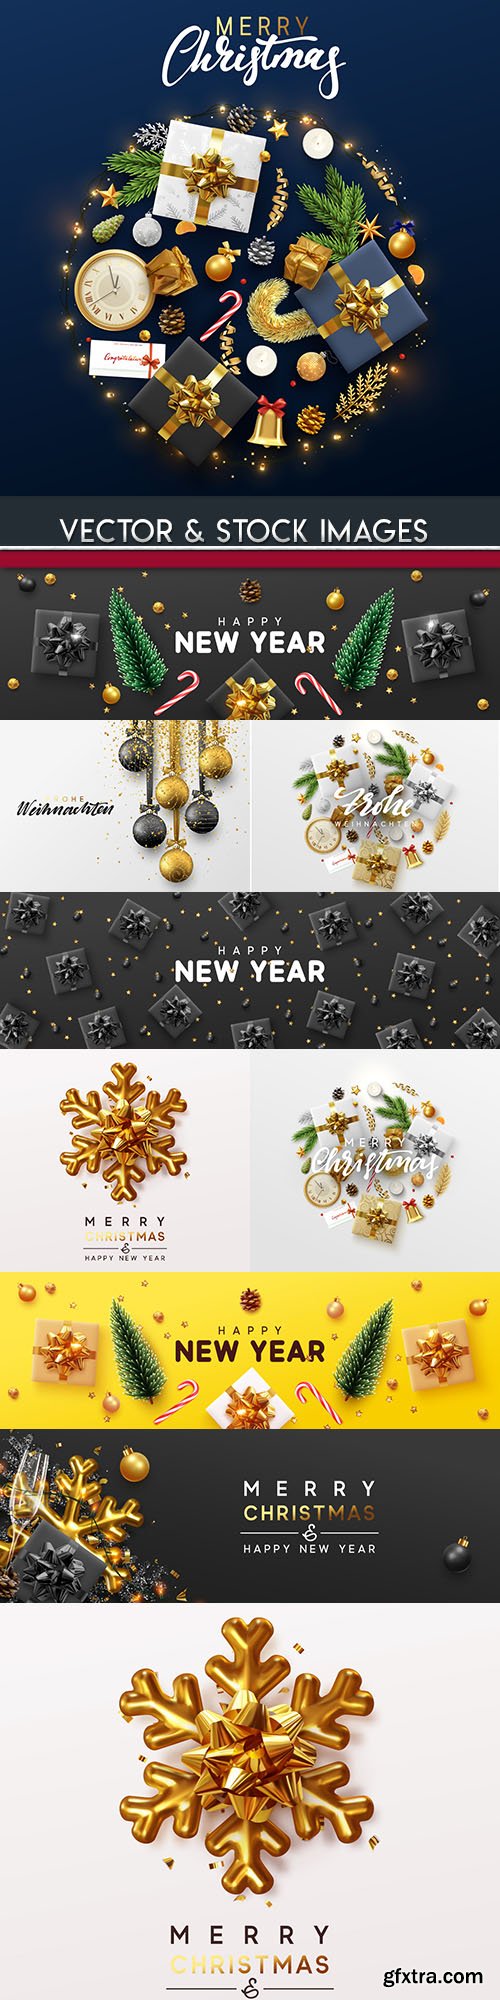 New Year and Christmas decorative design illustration